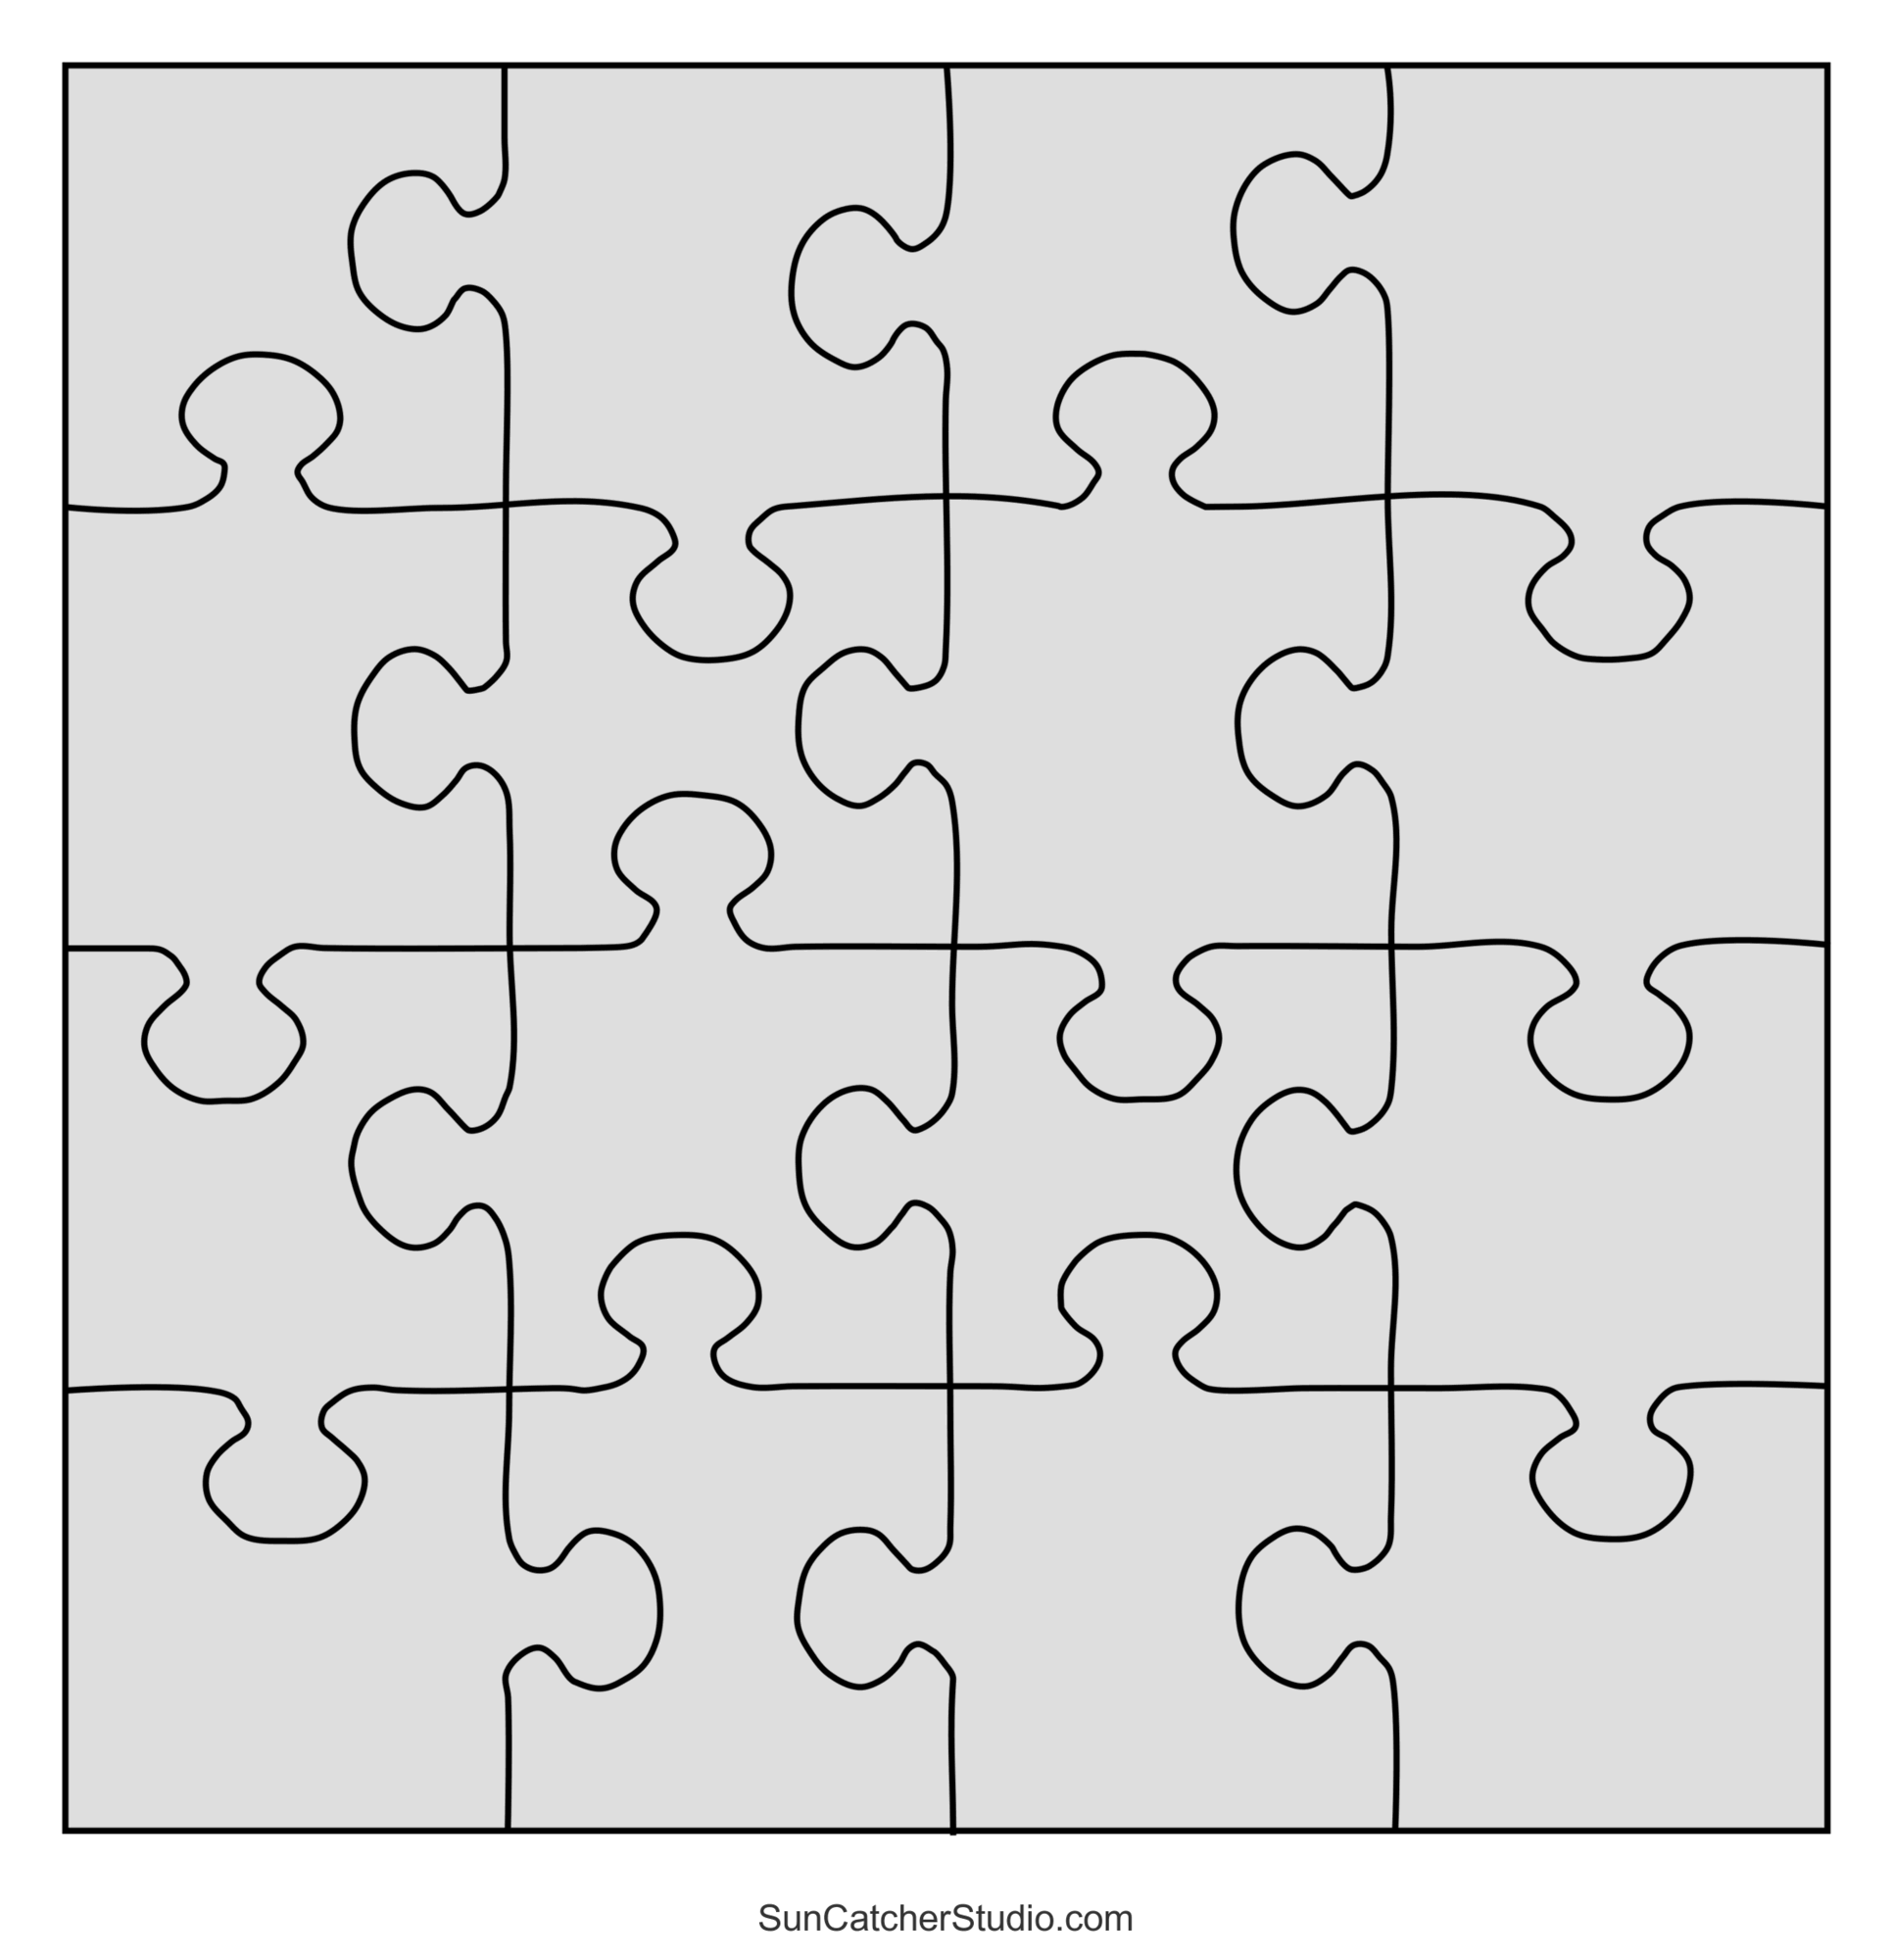 jigsaw-template-jigsaw-puzzle-template-puzzle-template-make-your-own-jigsaw- make-your-own-puzzle-diy-…